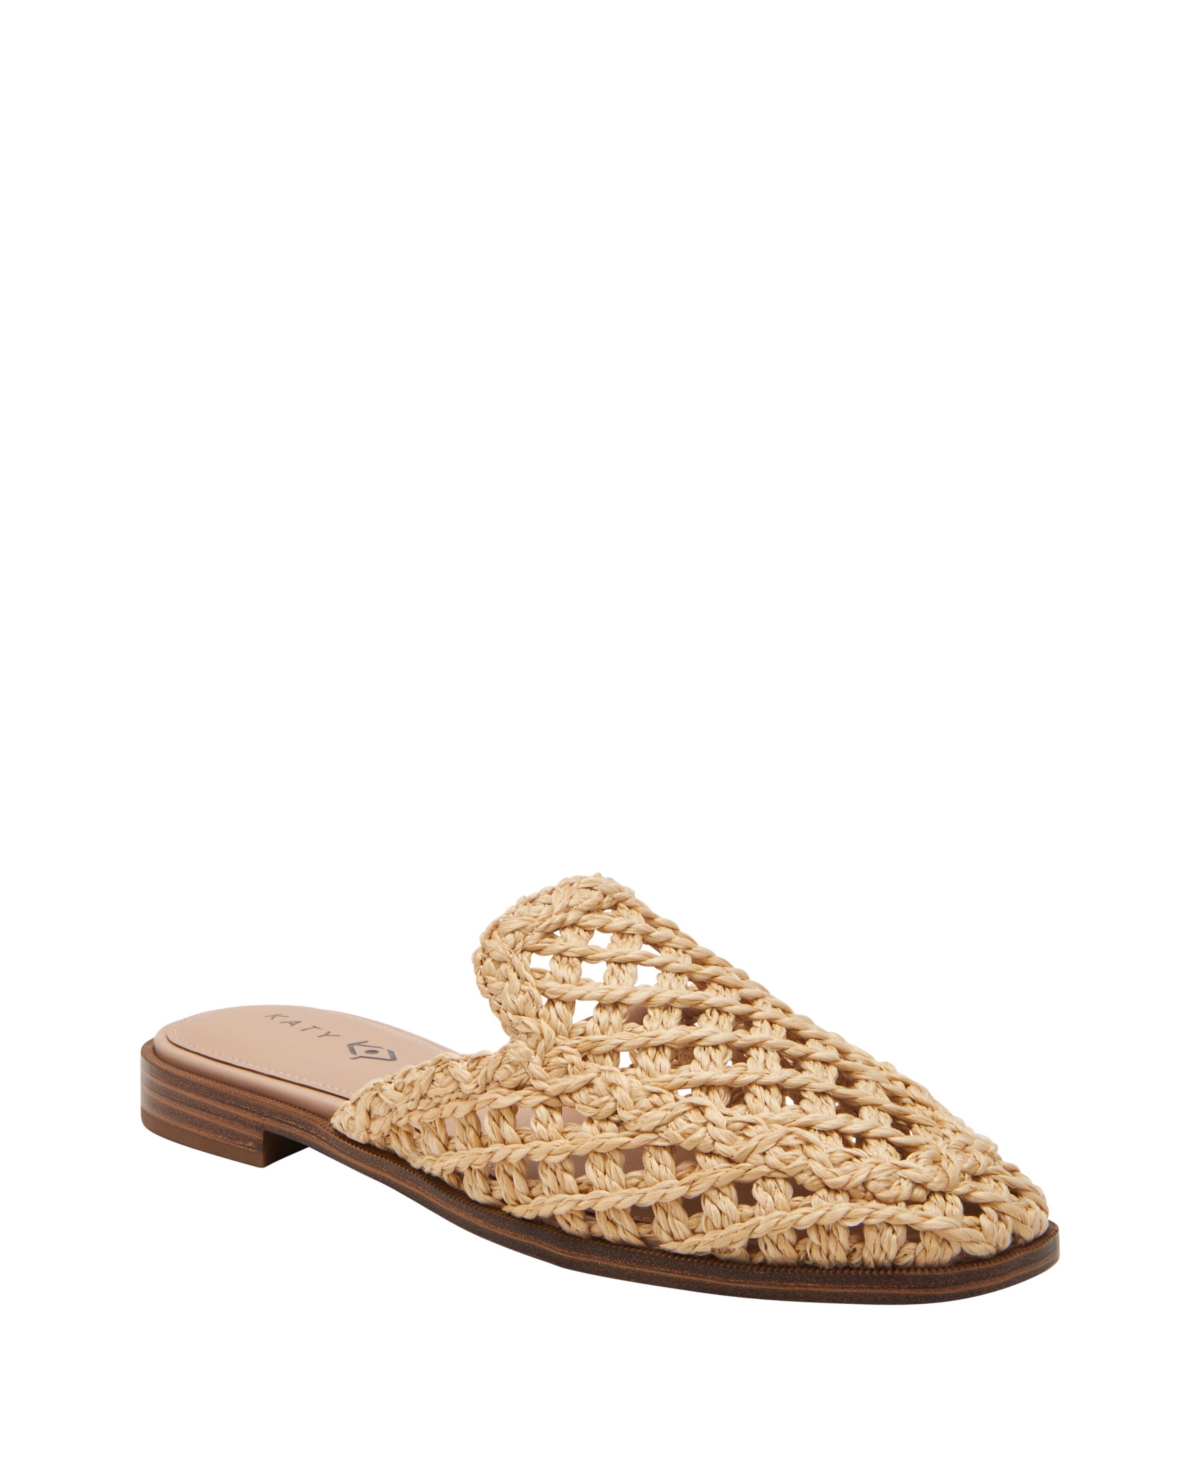 Women's Woven Slip-On Mules - Ginger Biscuit